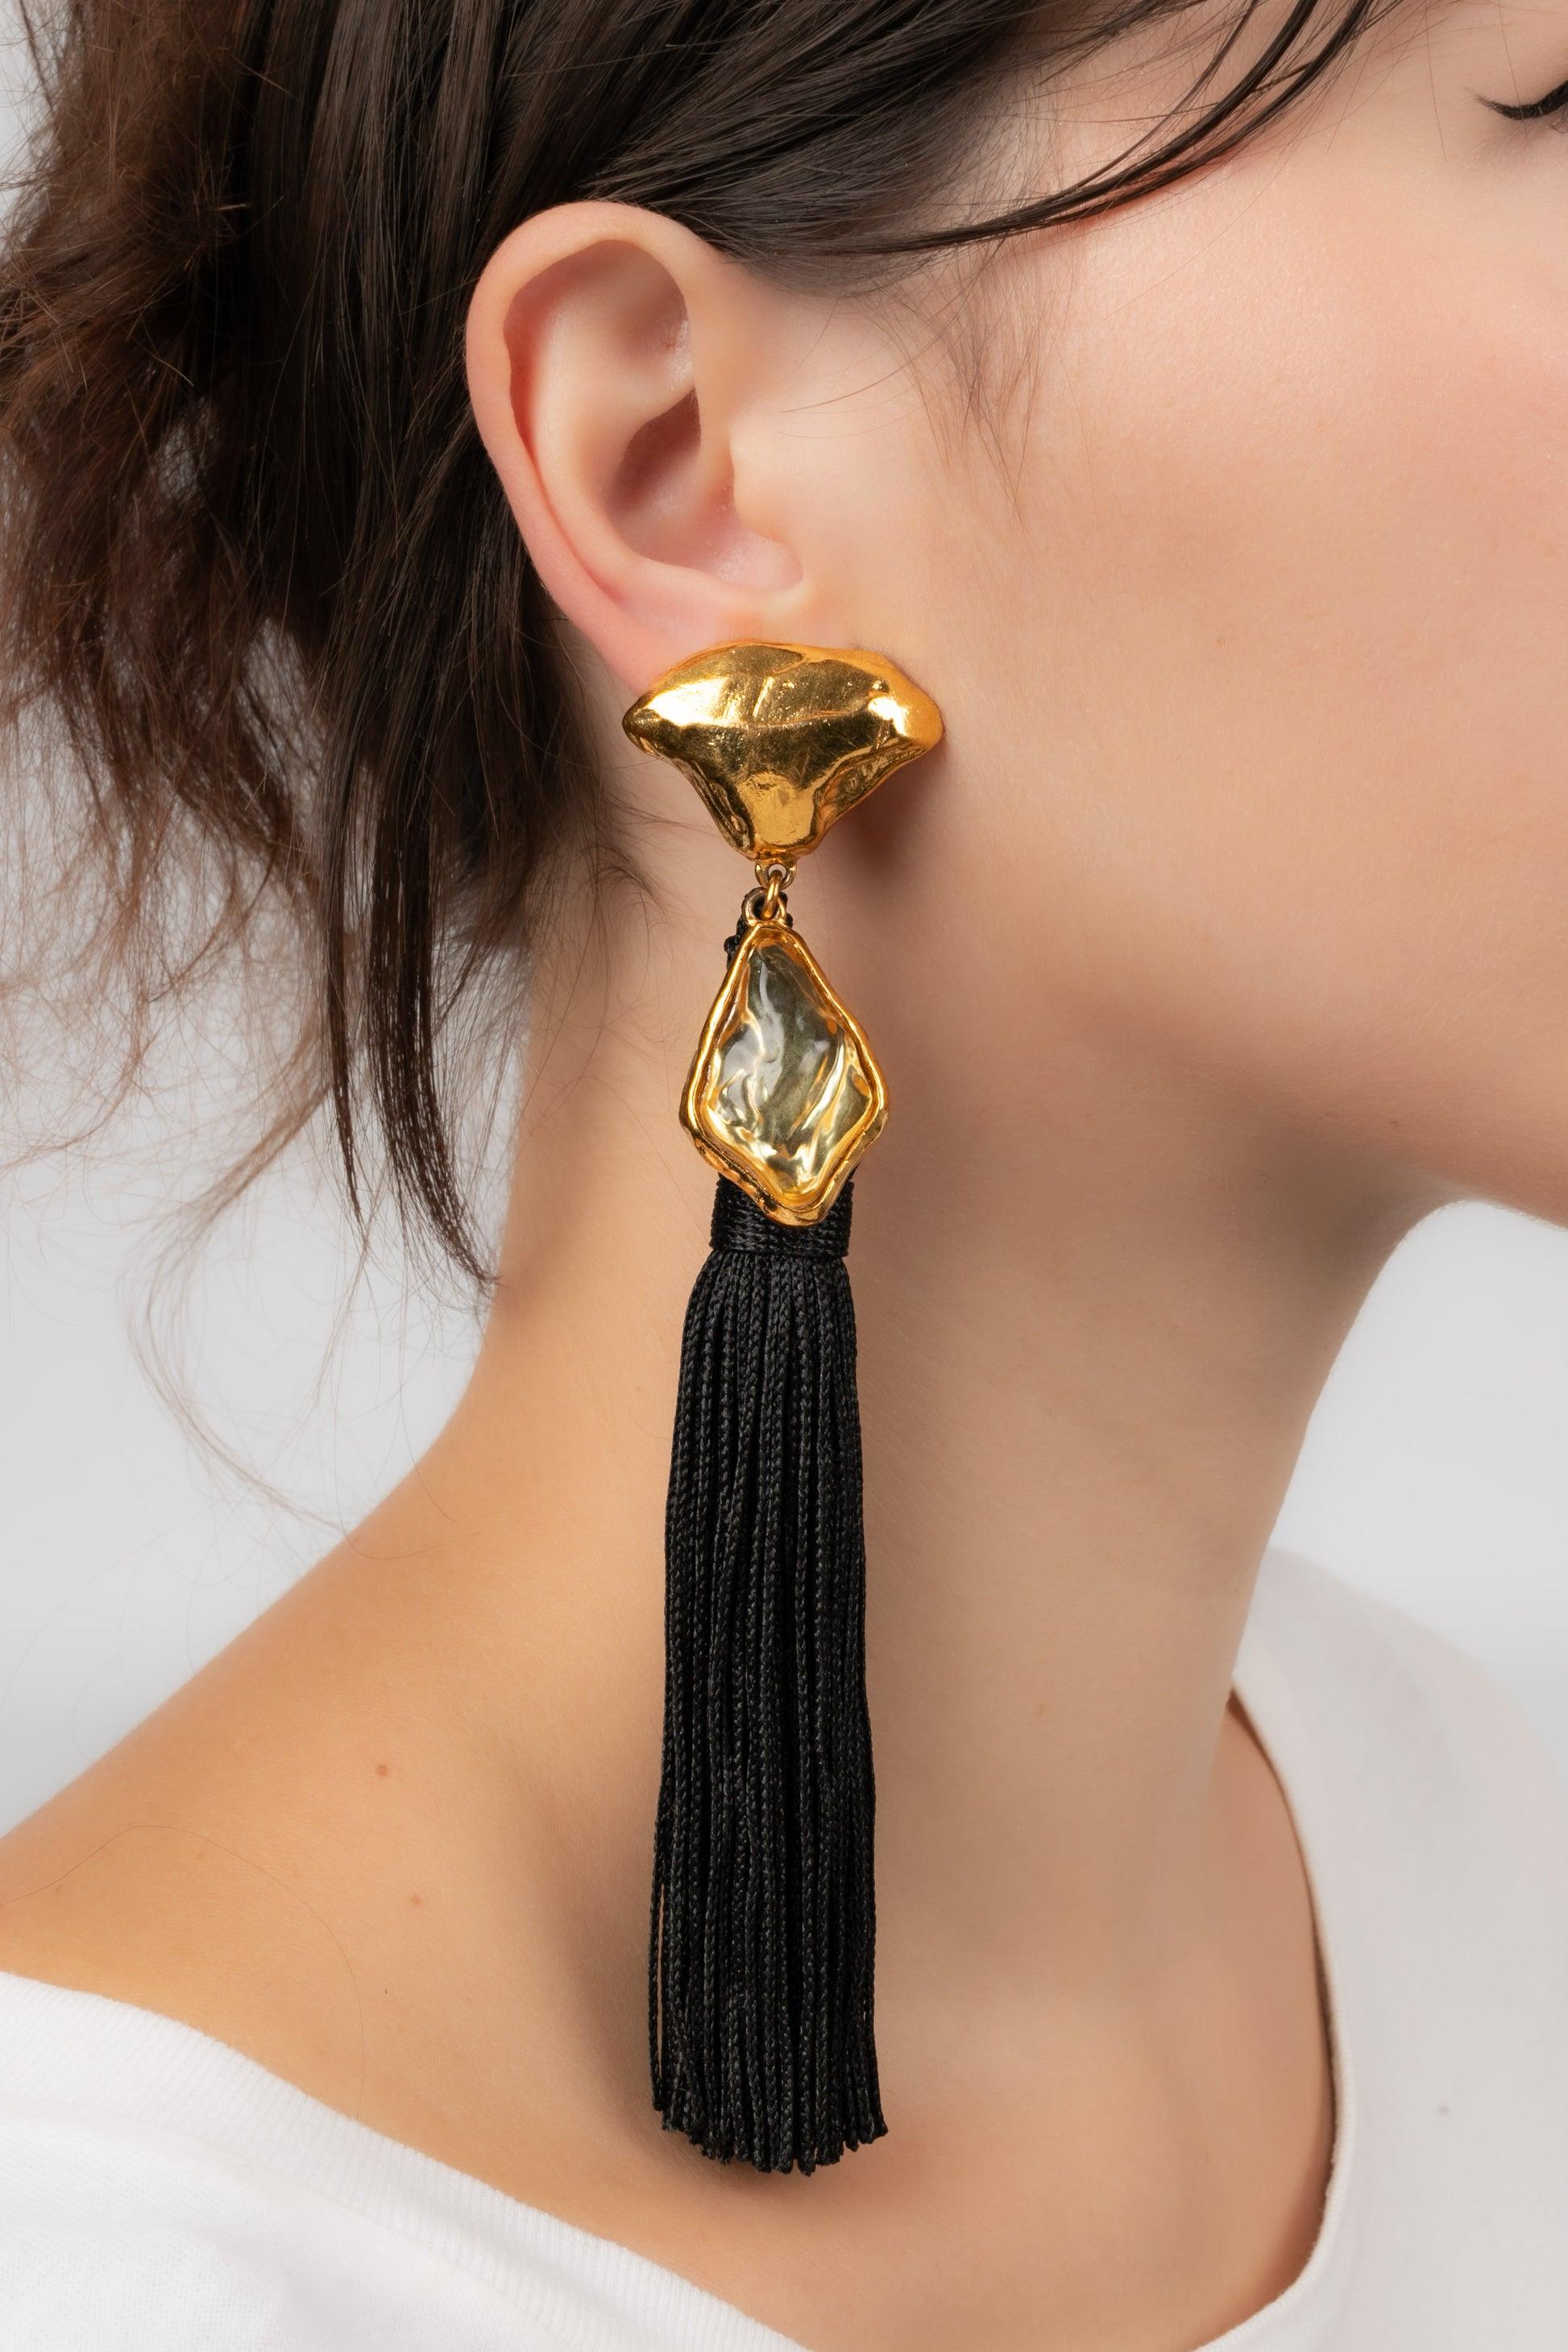 Yves Saint Laurent - (Made in France) Golden metal and resin earrings with a black trimmings pompom.

Additional information:
Condition: Very good condition
Dimensions: Length: 15 cm

Seller Reference: BO49